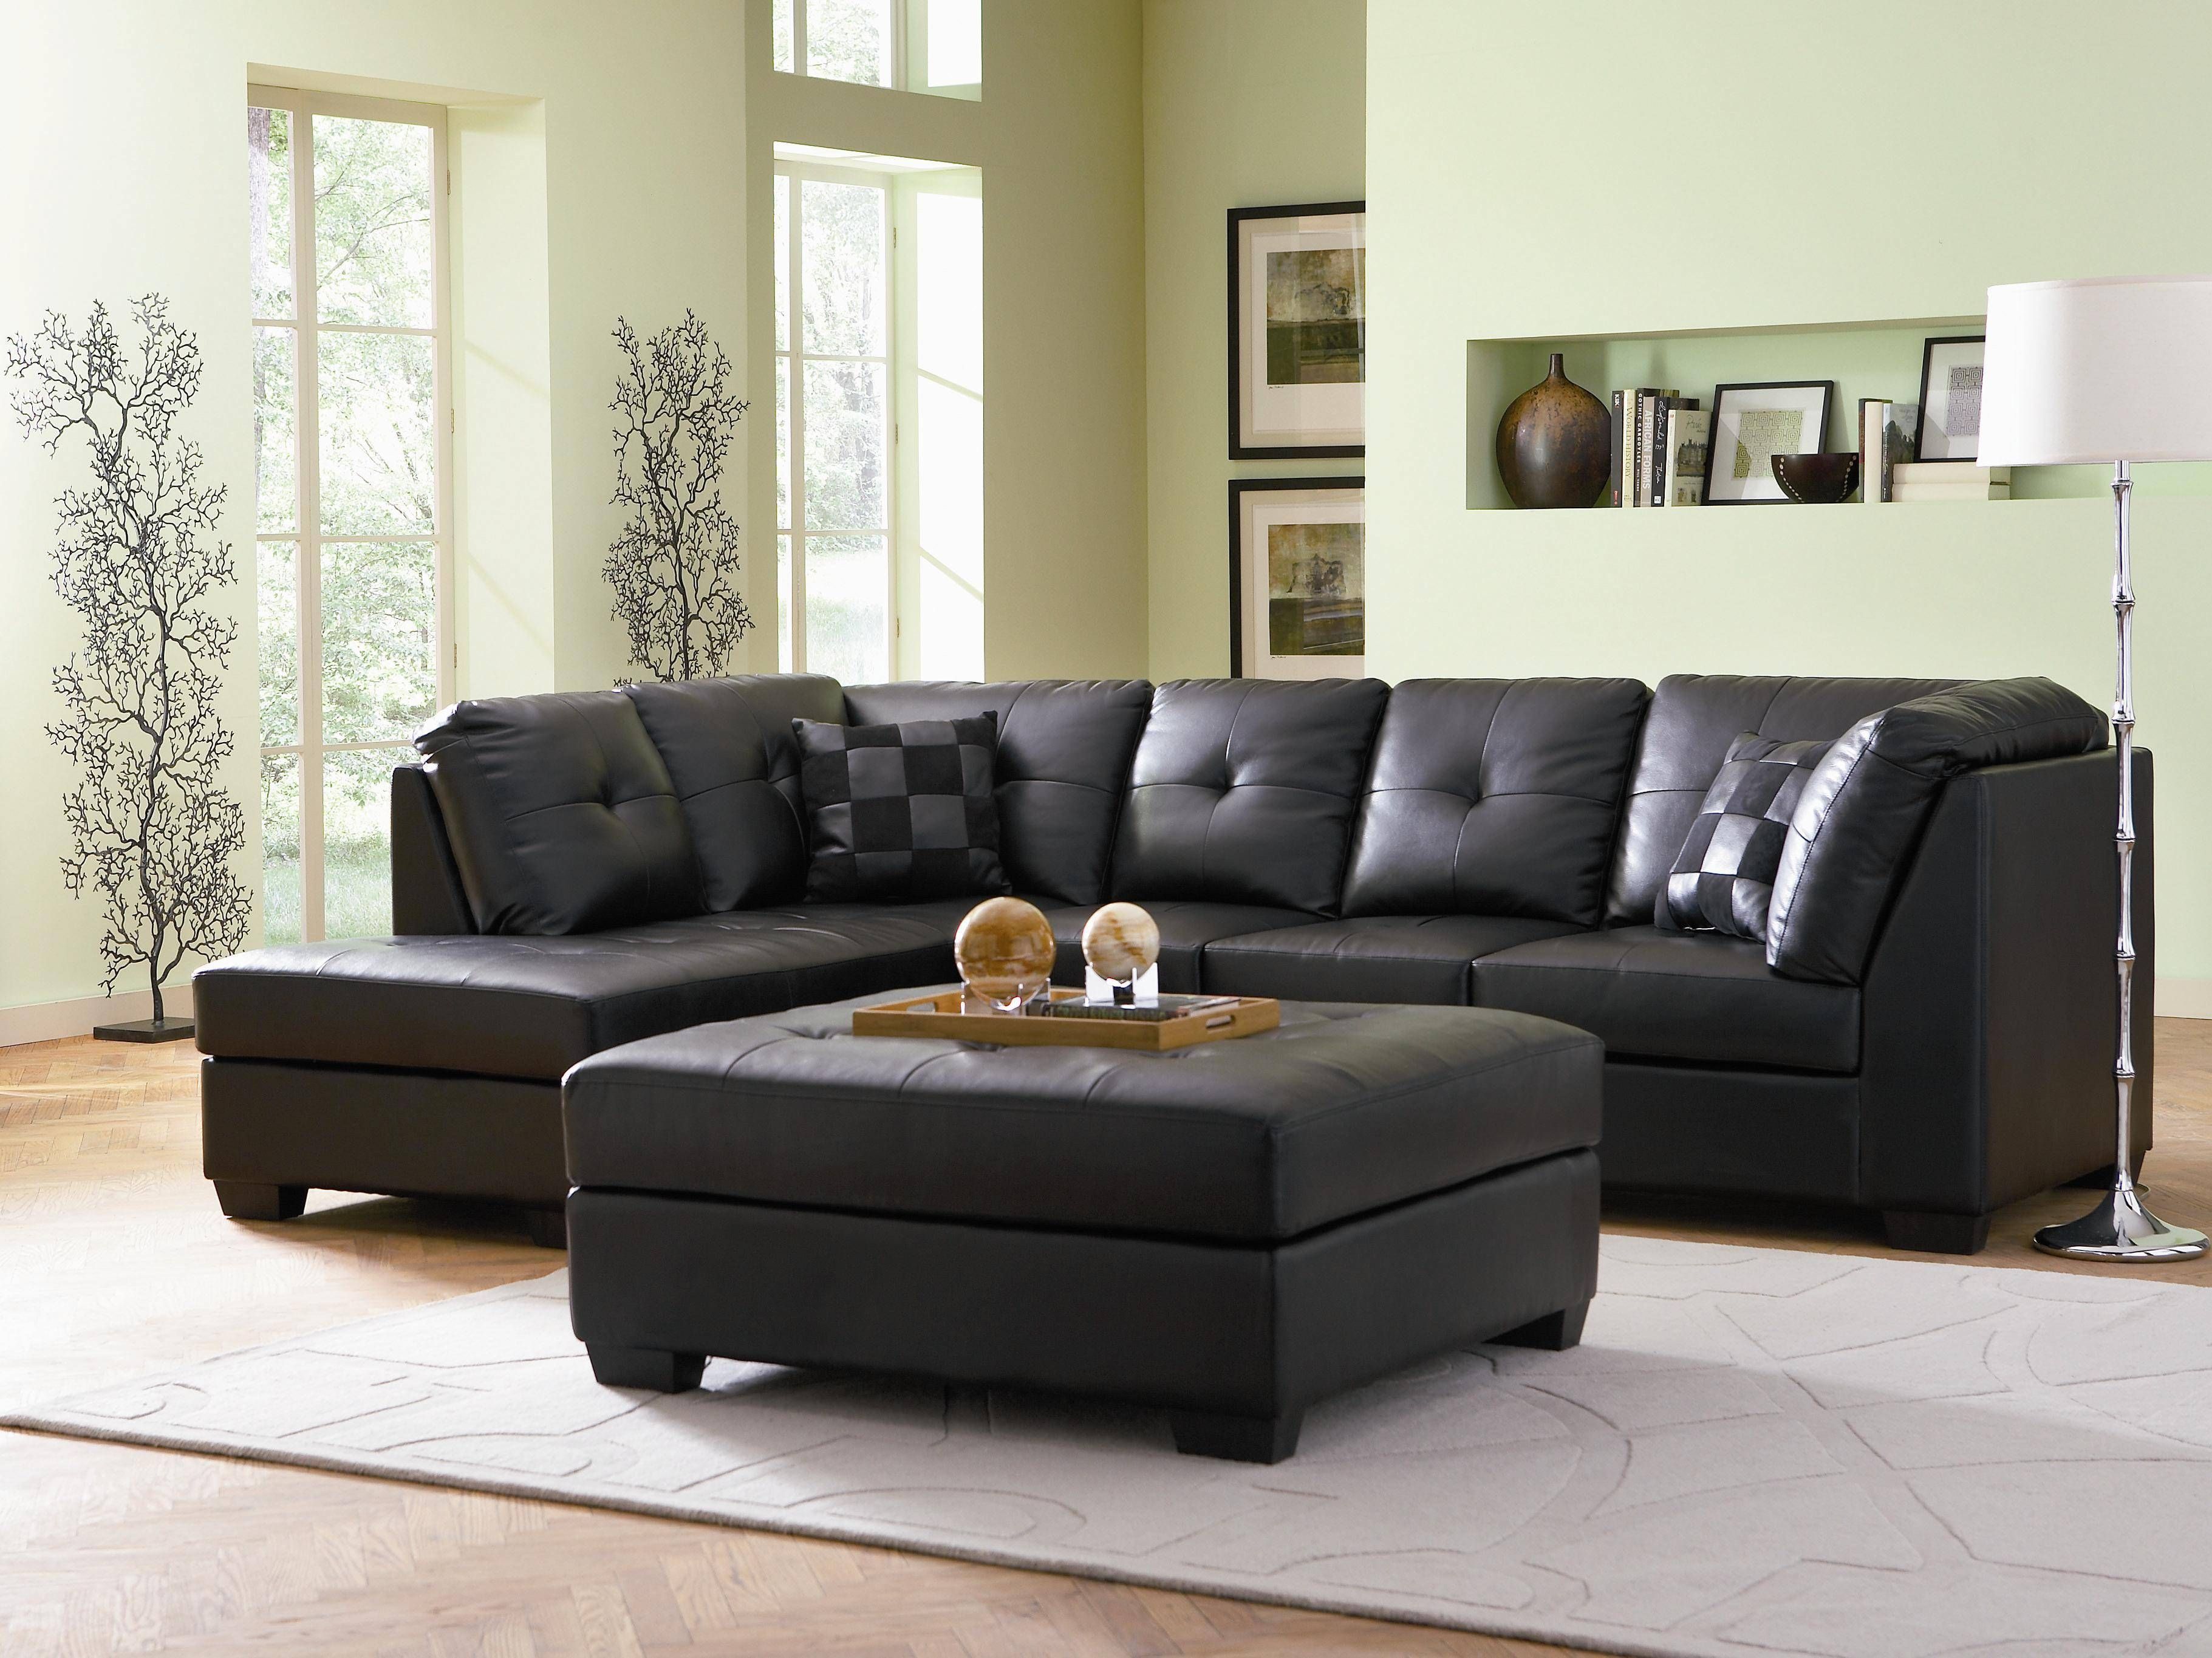 Elegant Leather Sectional Sofas On Sale 37 On Giant Sectional Sofa Throughout Giant Sofas (View 13 of 15)